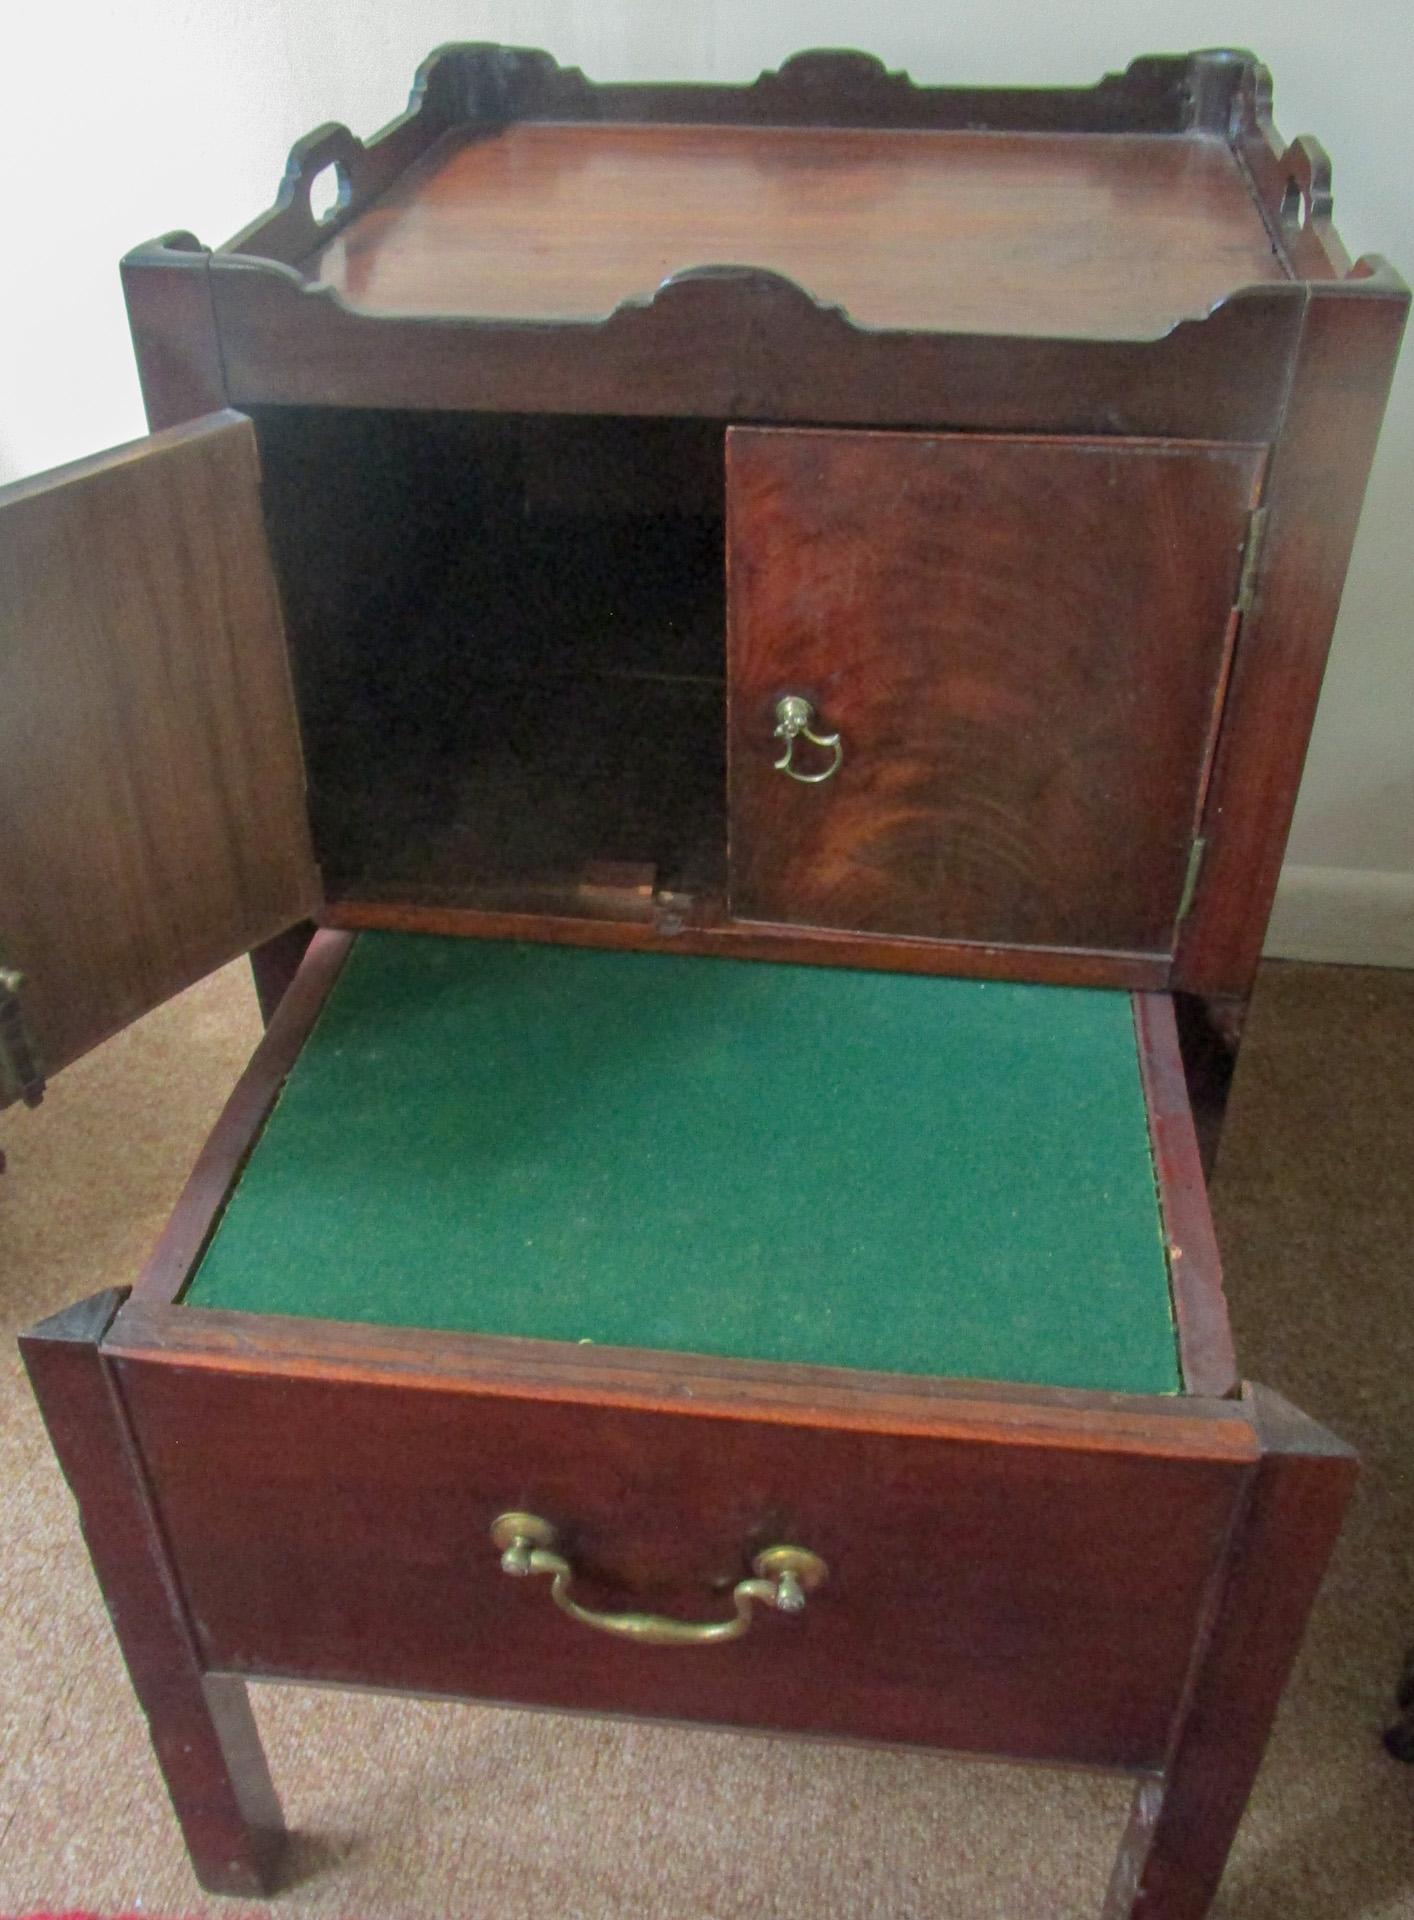 Georgian period mahogany English bedside table commode featuring a full scalloped gallery top with pierced handles and two-paneled cupboard doors above a single deep pull out surface covered with felt. This surface started out as a single drawer but